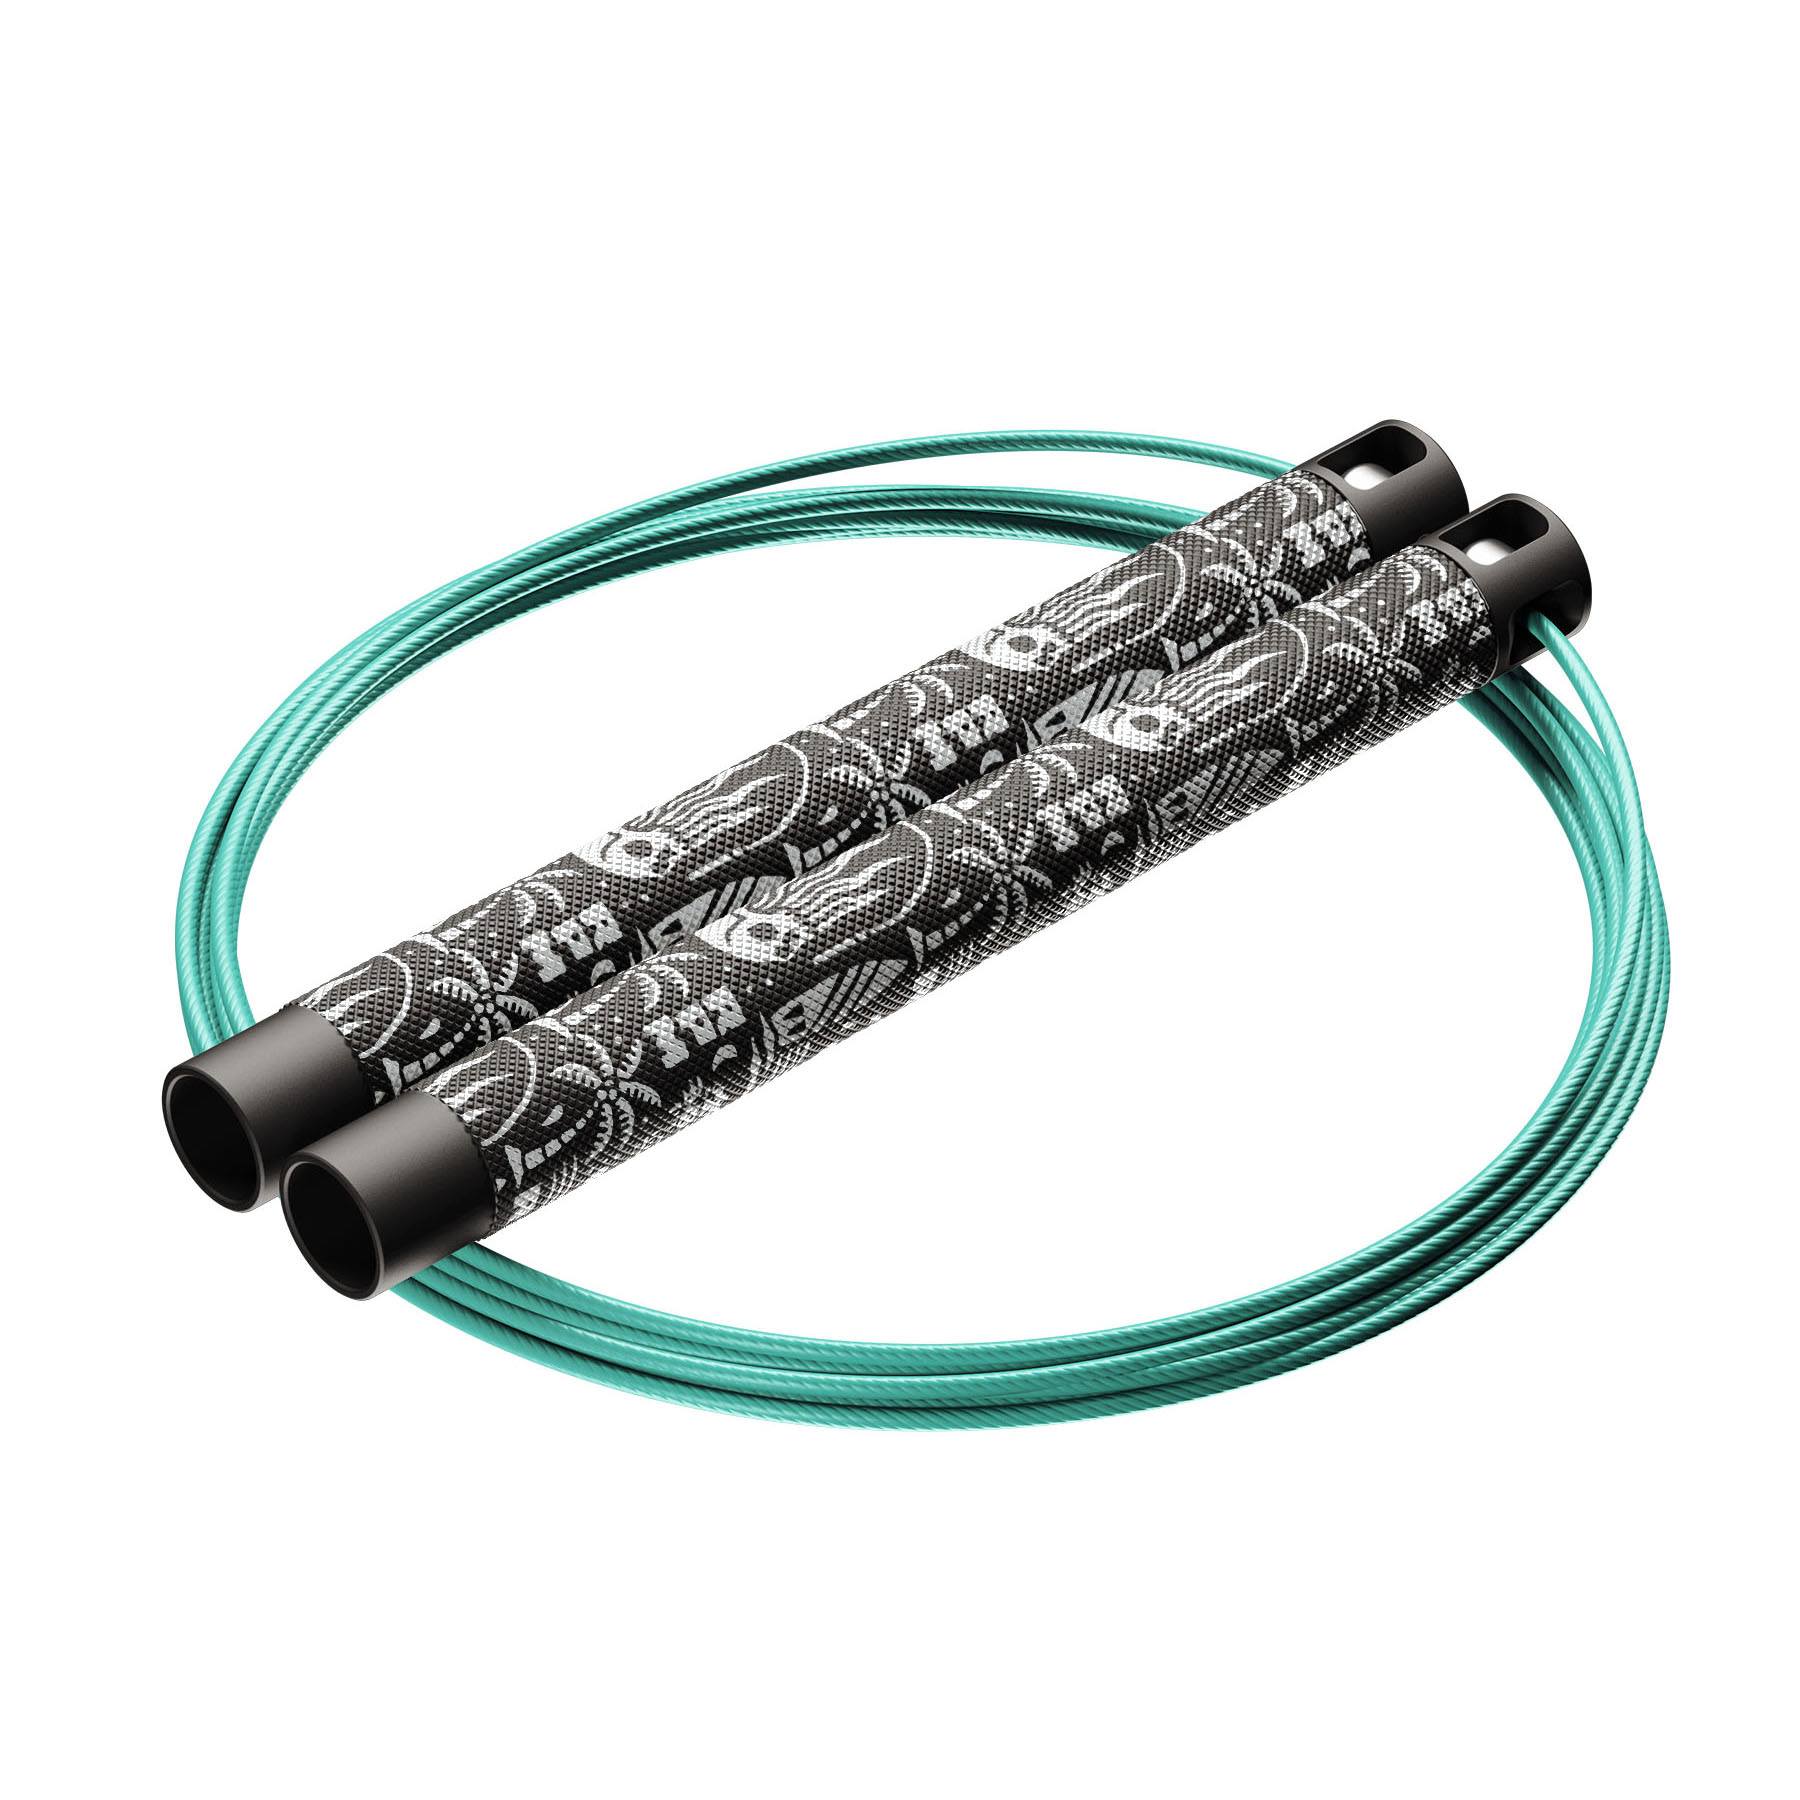 RPM Speed Rope - Session4 (Limited Edition)